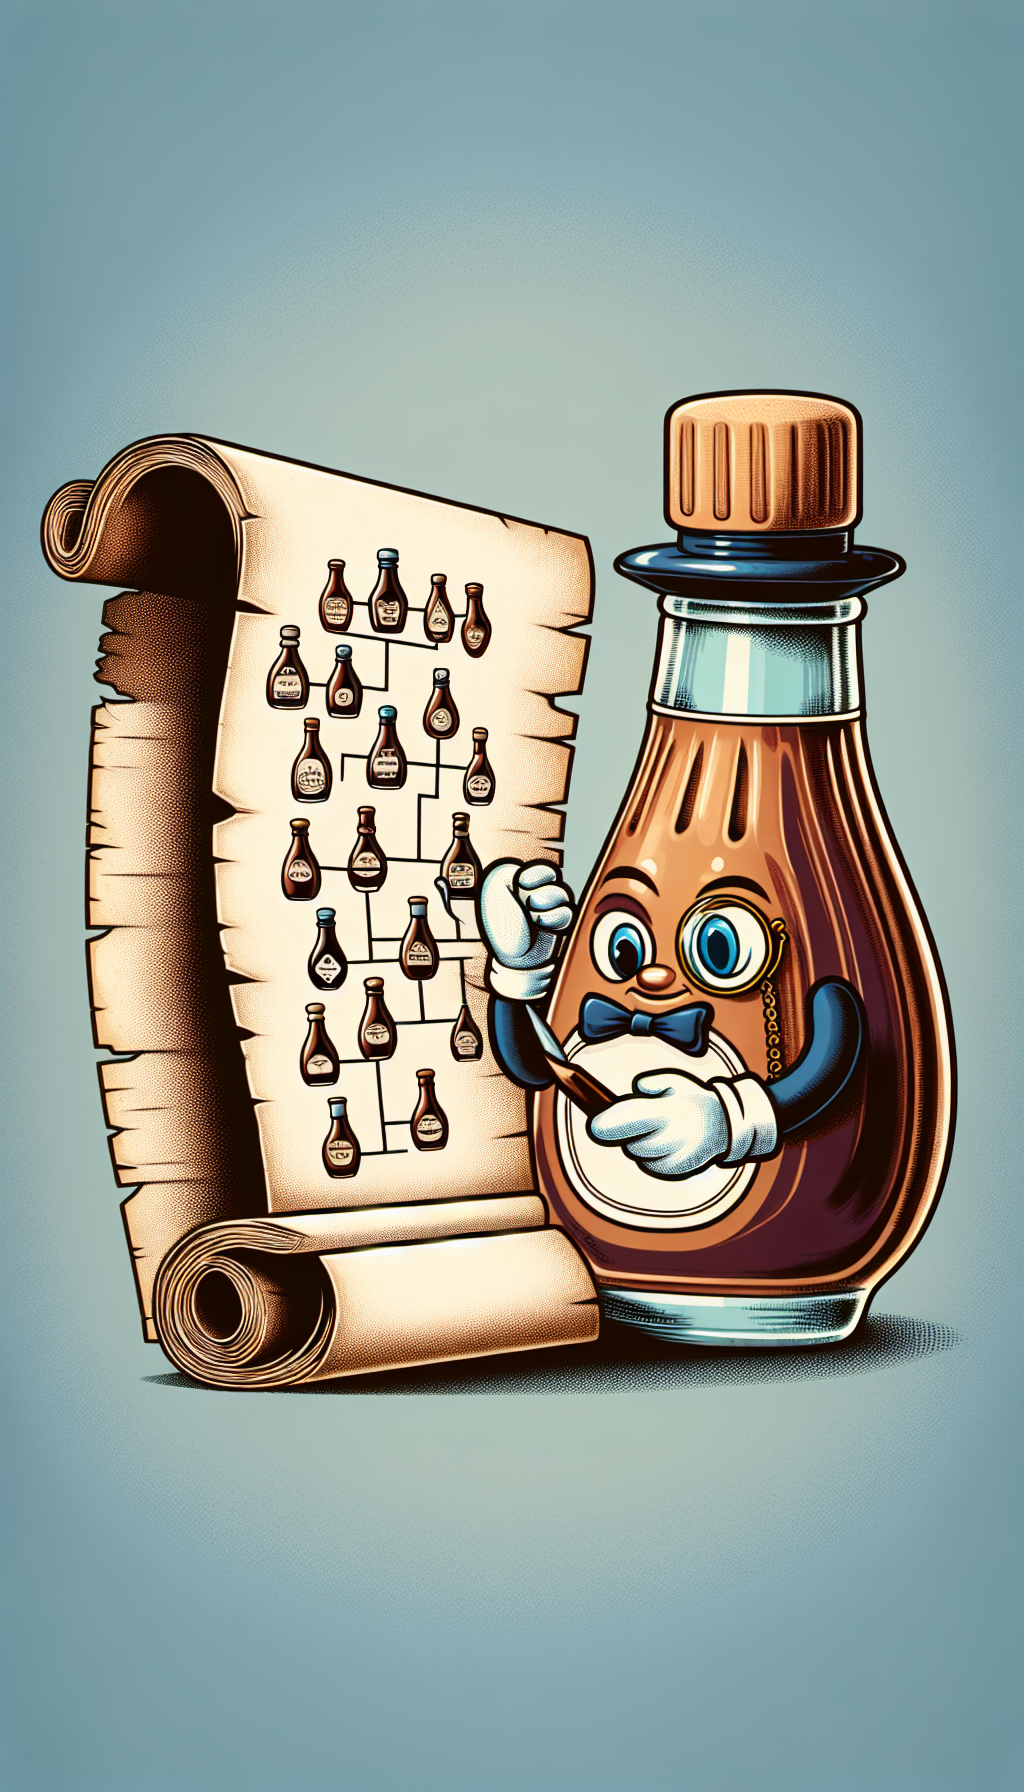 A whimsical vignette of an anthropomorphic syrup bottle adorned with a monocle and bow tie, perusing a tattered family tree scroll that unfurls to reveal nested images of progressively older syrup bottles. Each ancestor bottle glimmers with increasing value, represented by intricate etchings and labels, as well as a subtle radiance, symbolizing their age and rarity.